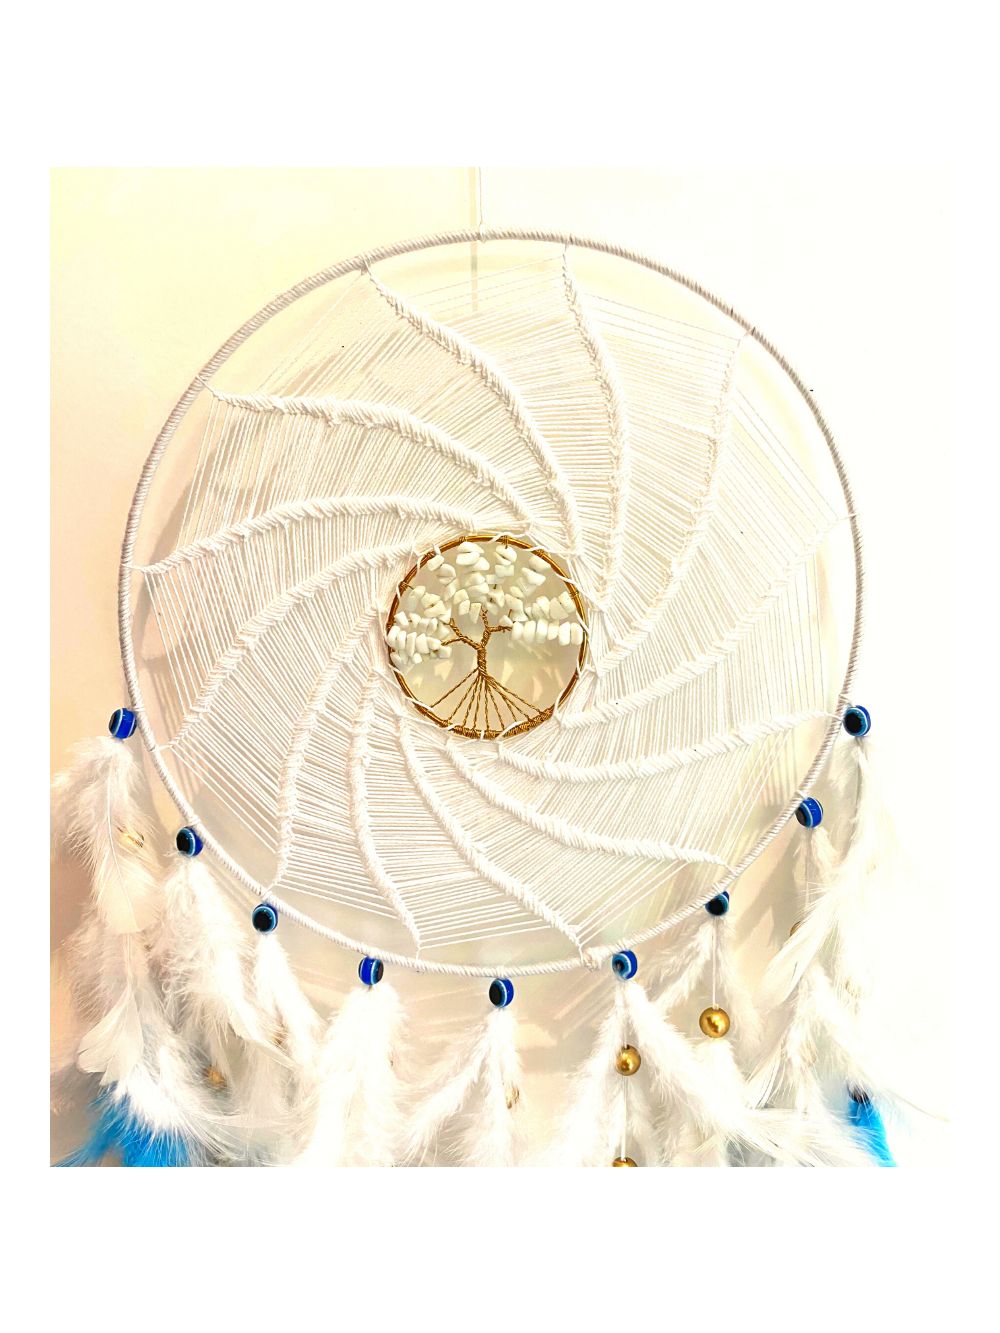 Serenity White and Blue Wall Large Dream Catcher